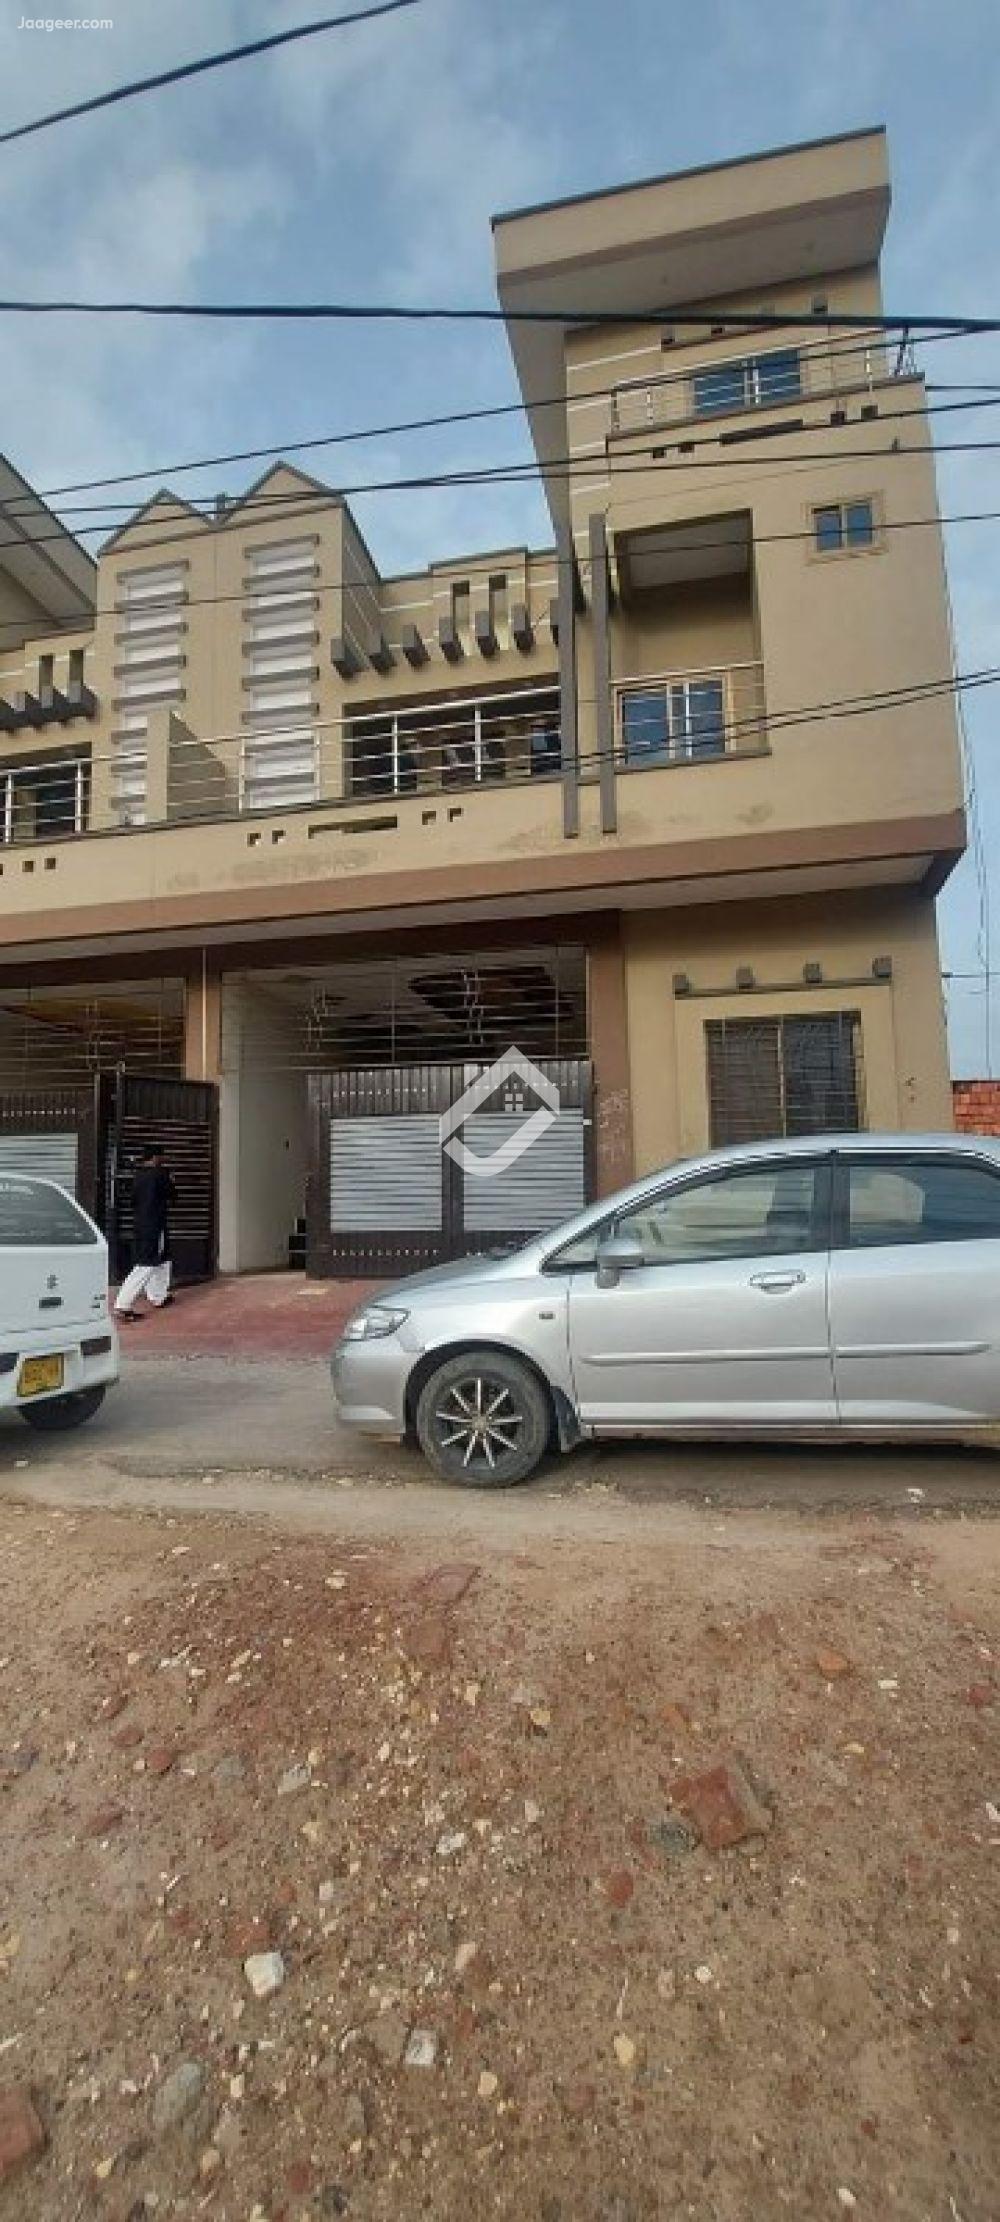 View  5 Marla Double Storey House For Sale In City School Rahim Yar Khan in City School Rahim Yar Khan, Rahim Yar Khan